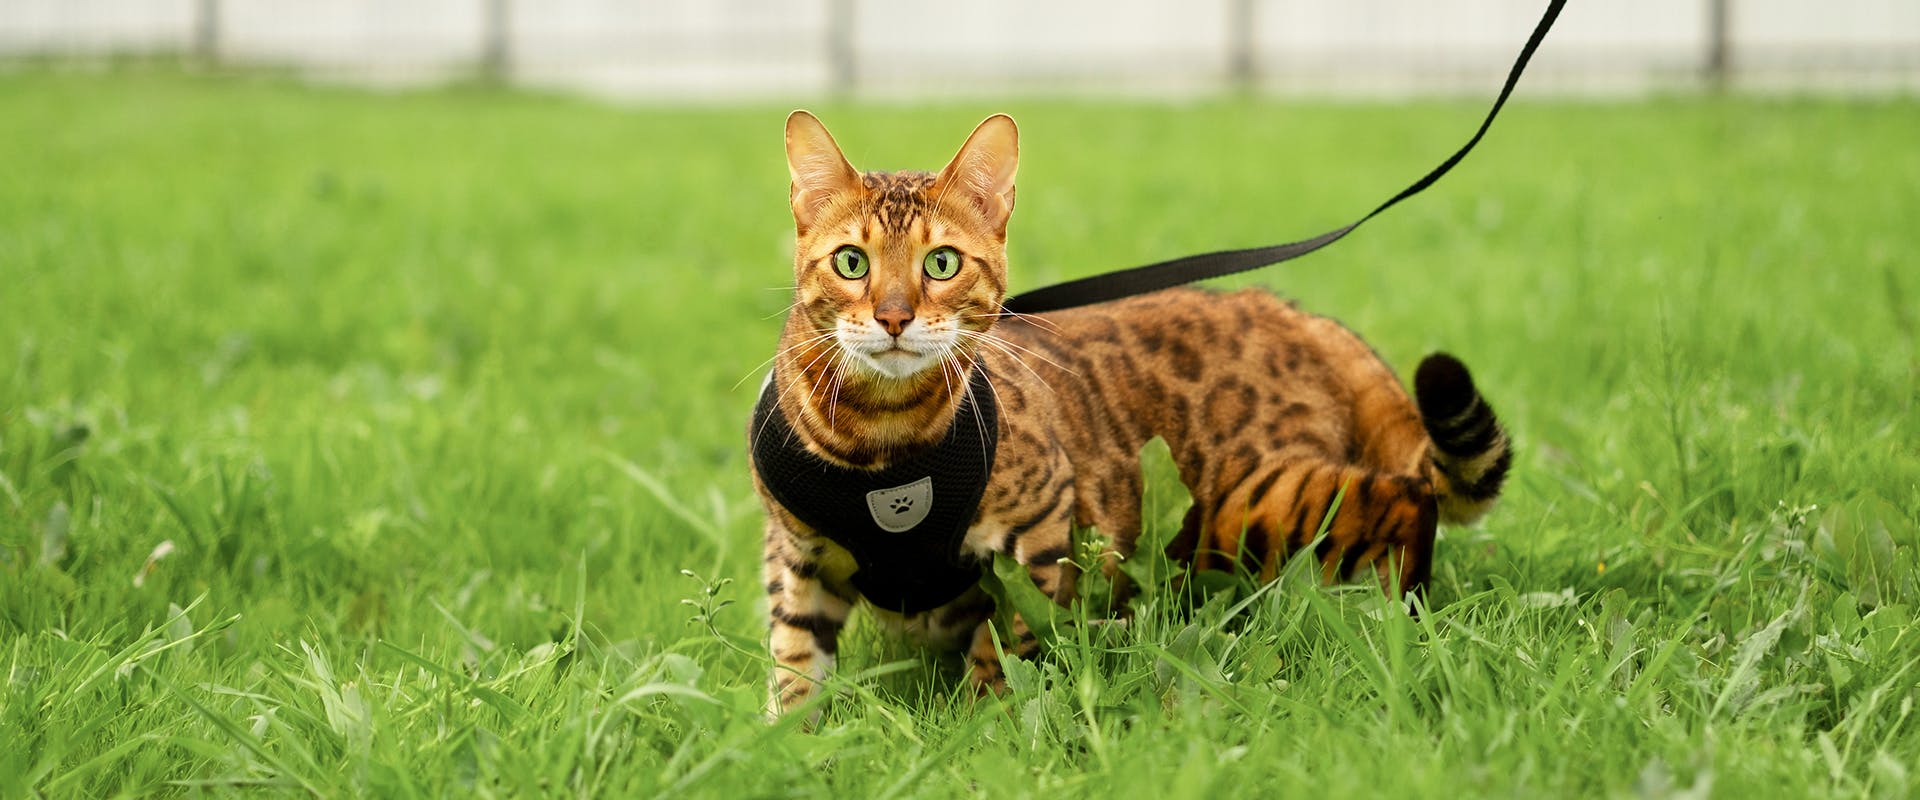 A cat standing in some grass, wearing a black cat harness and leash